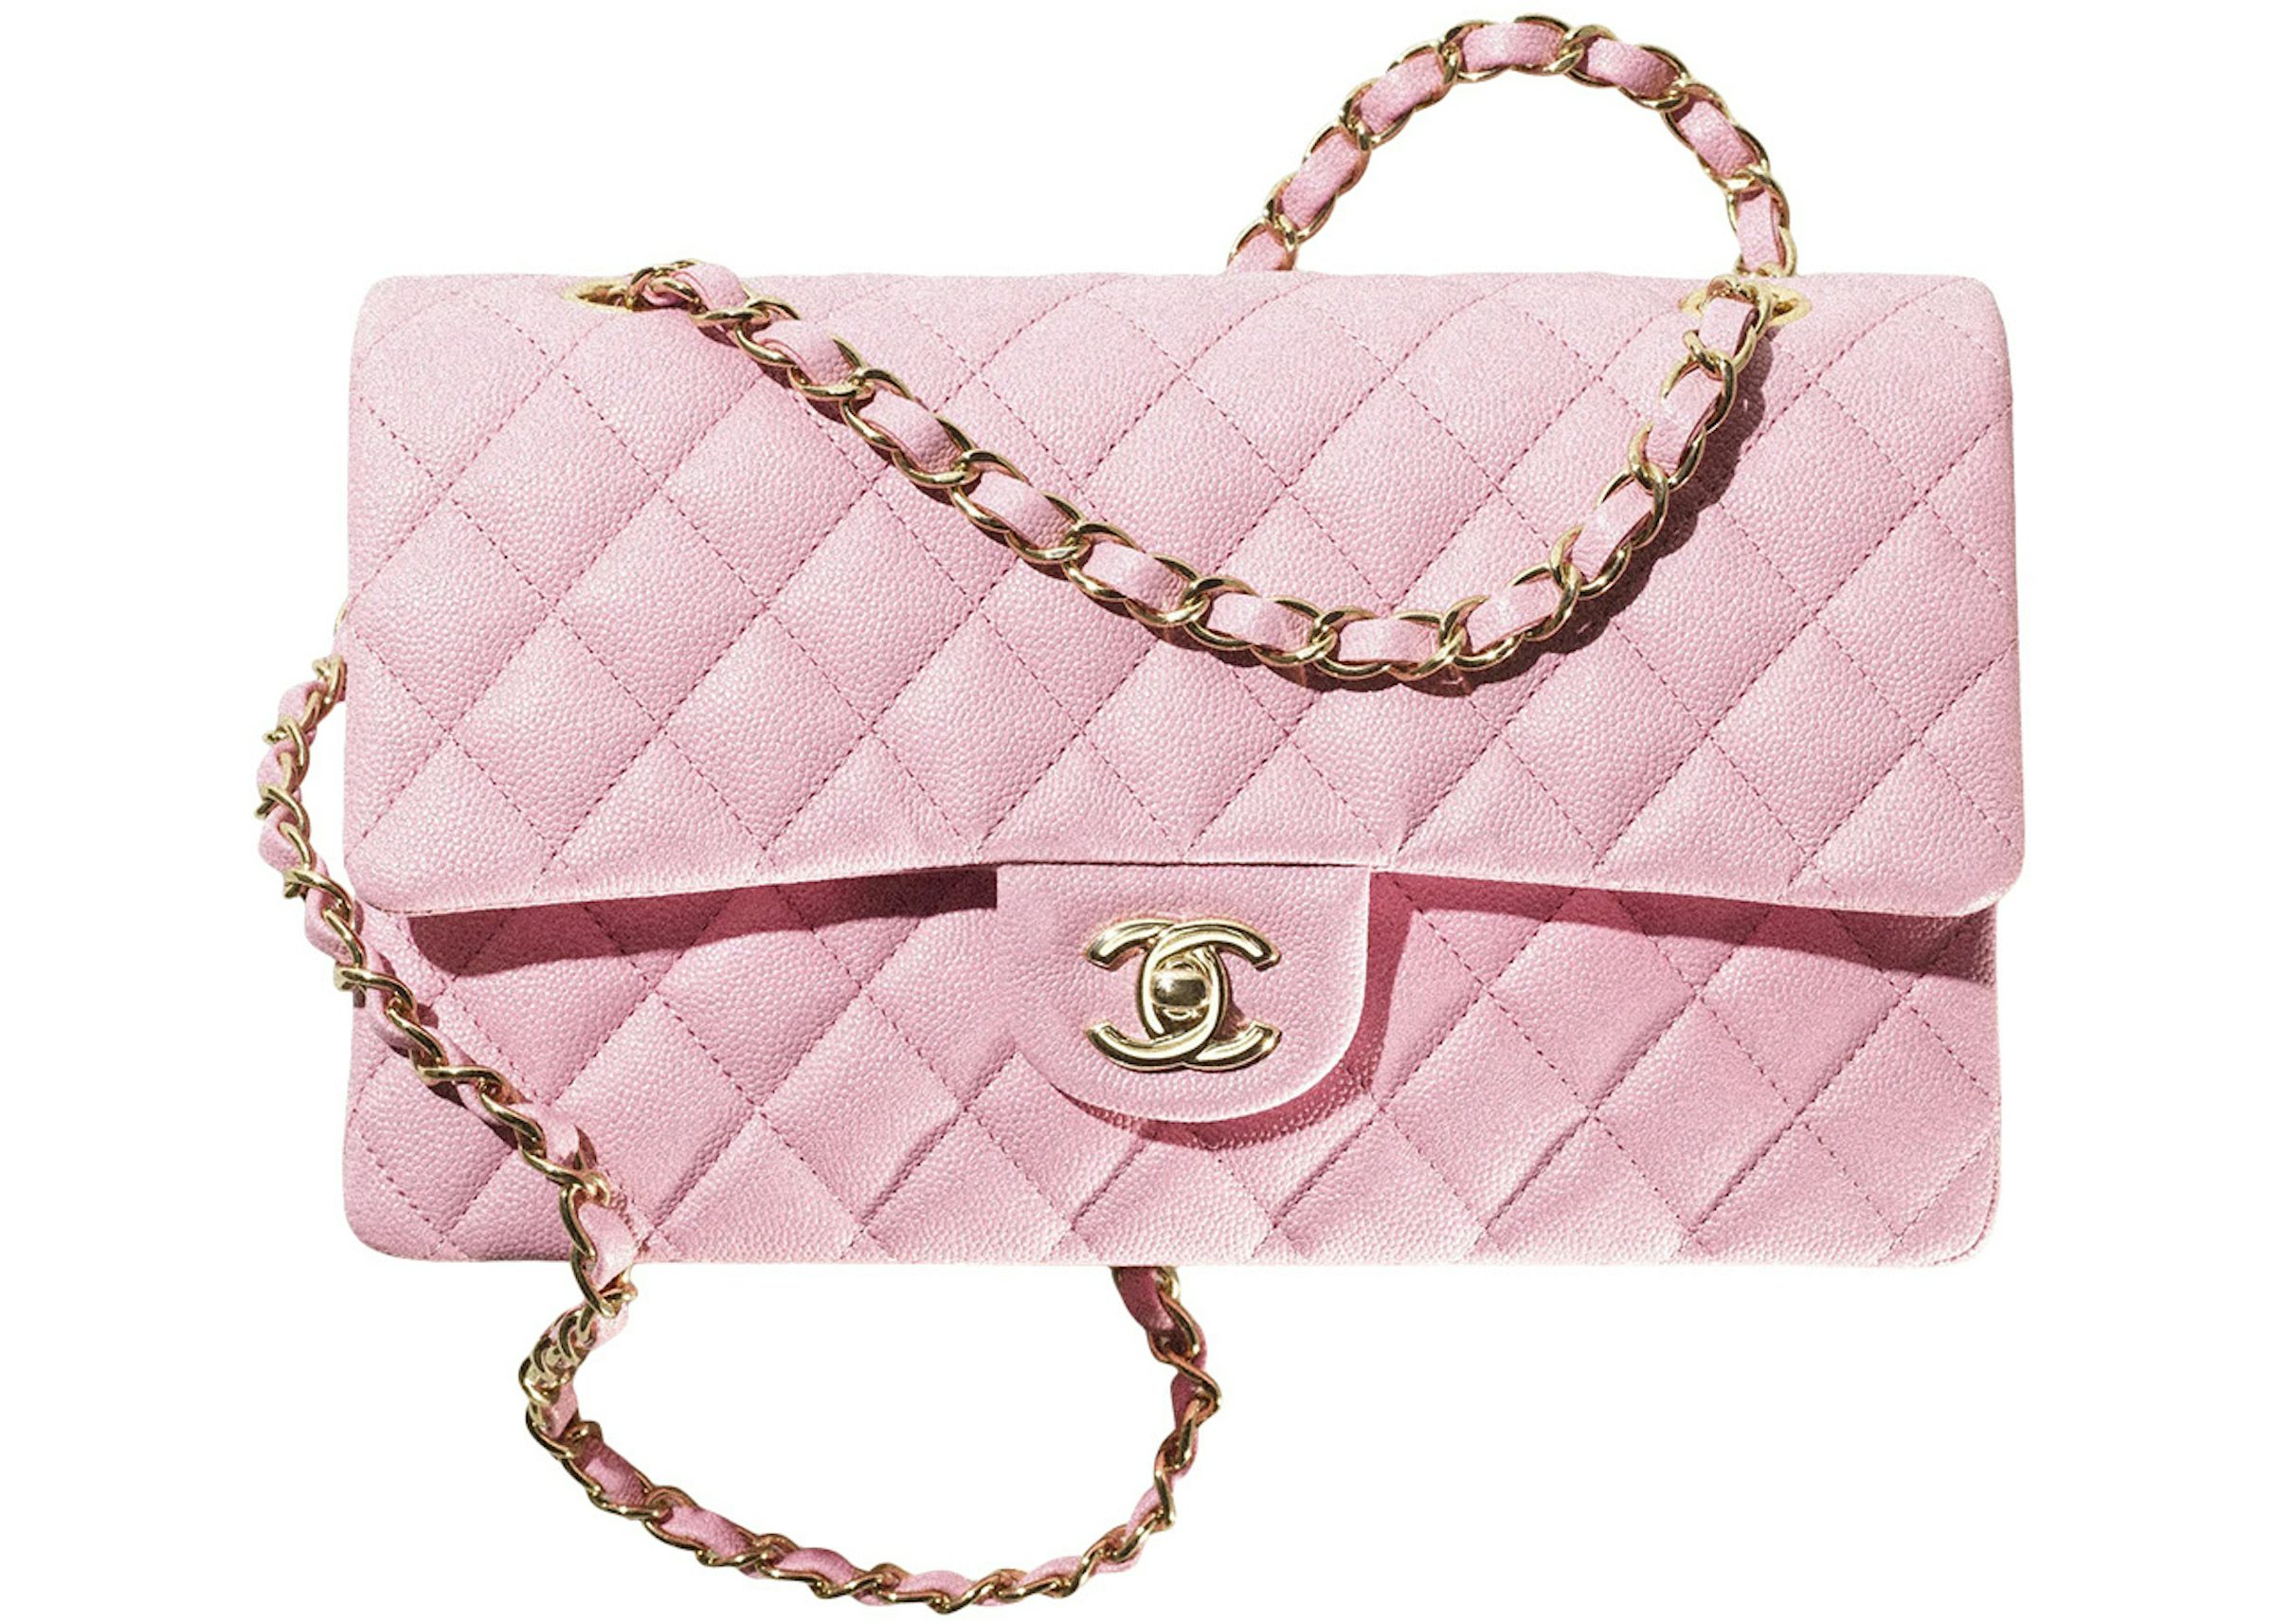 Buy Chanel Accessories - Color Pink - StockX